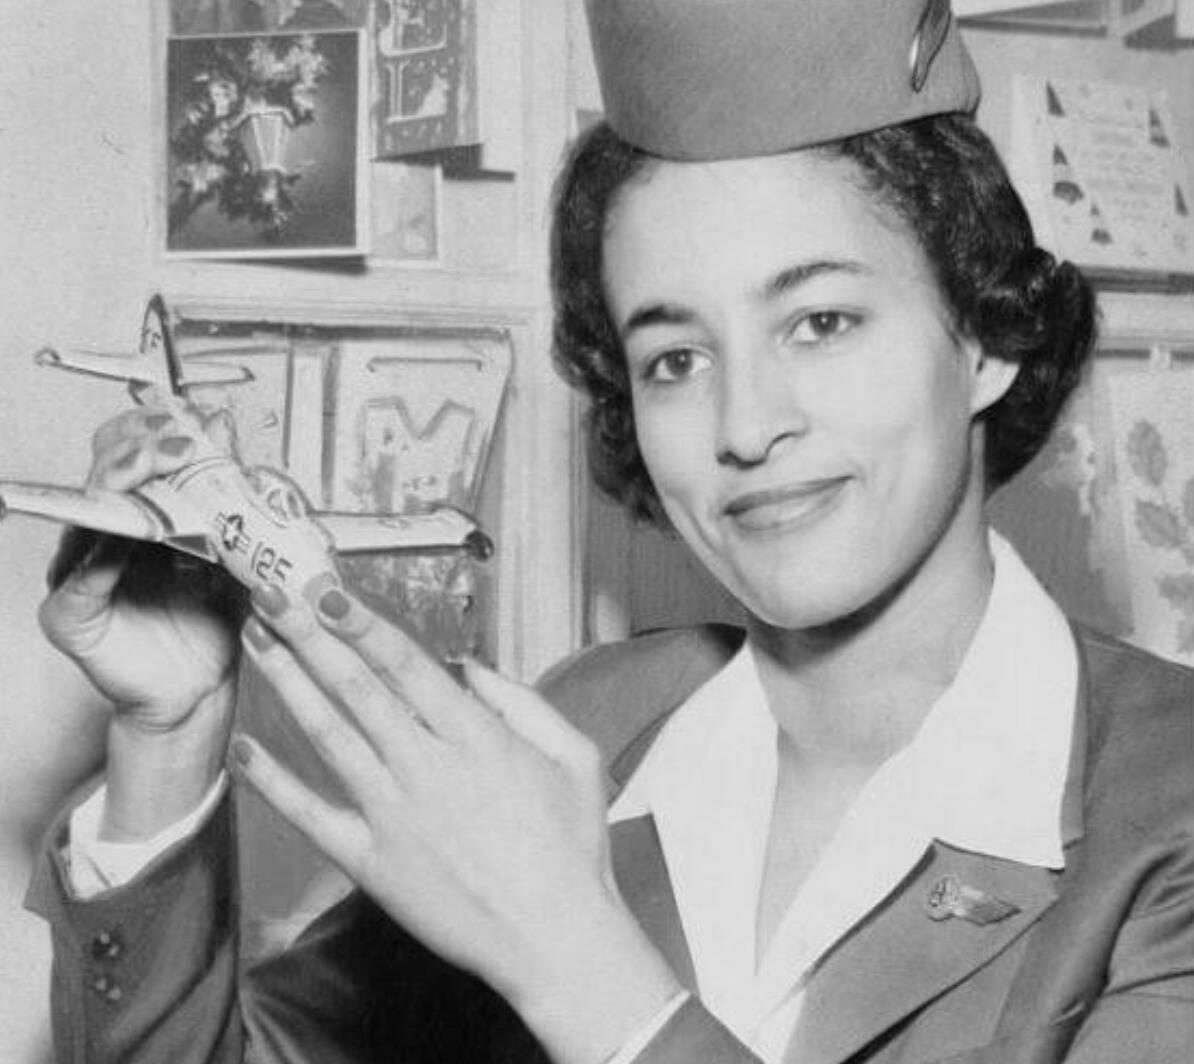 <p>There were a lot of requirements (many of which were aspects like height, race, and weight) that eliminated many women from being able to apply for the job. And even after they landed the job, stewardesses had a lot of rules to follow.</p> <p>Ruth Carol Taylor, pictured here, was the first African-American flight attendant to fly the skies. She filed a complaint against TWA for banning minorities from being hired. Mohawk airlines hired her on in 1958. Unfortunately, she only held the job for six months. She had to quit once she became engaged to be married.</p>